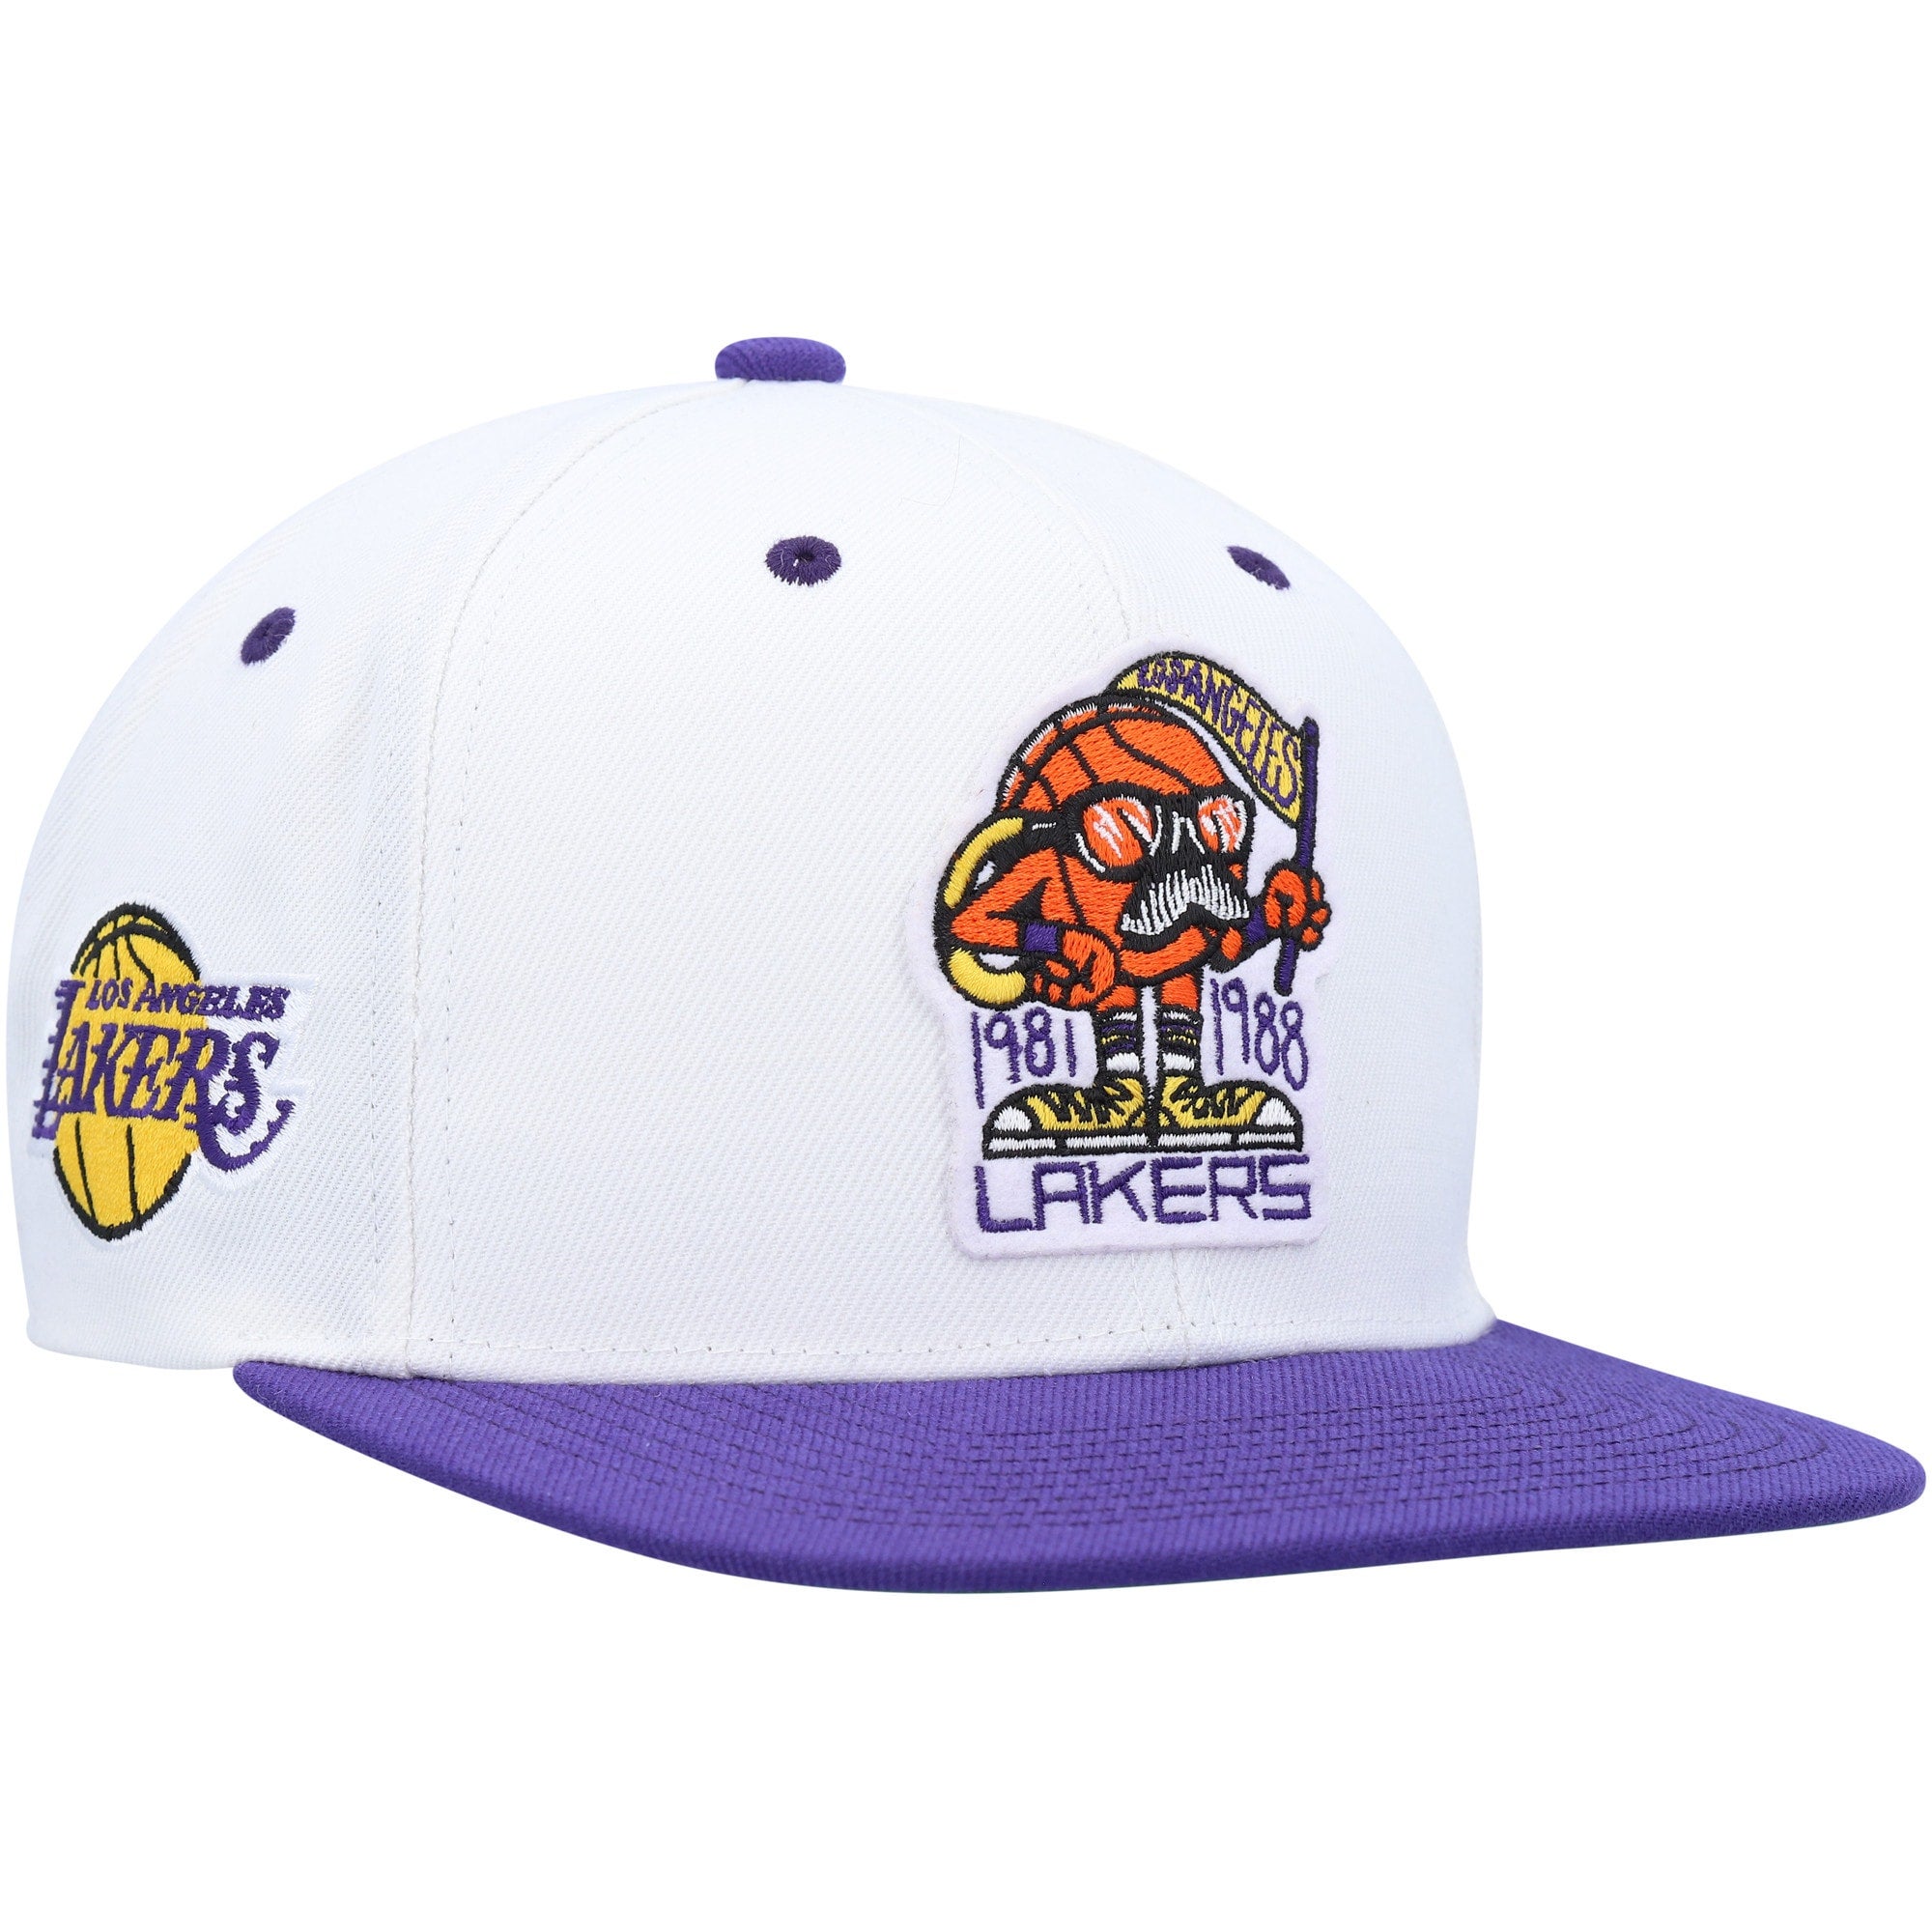 lakers mitchell ness hat